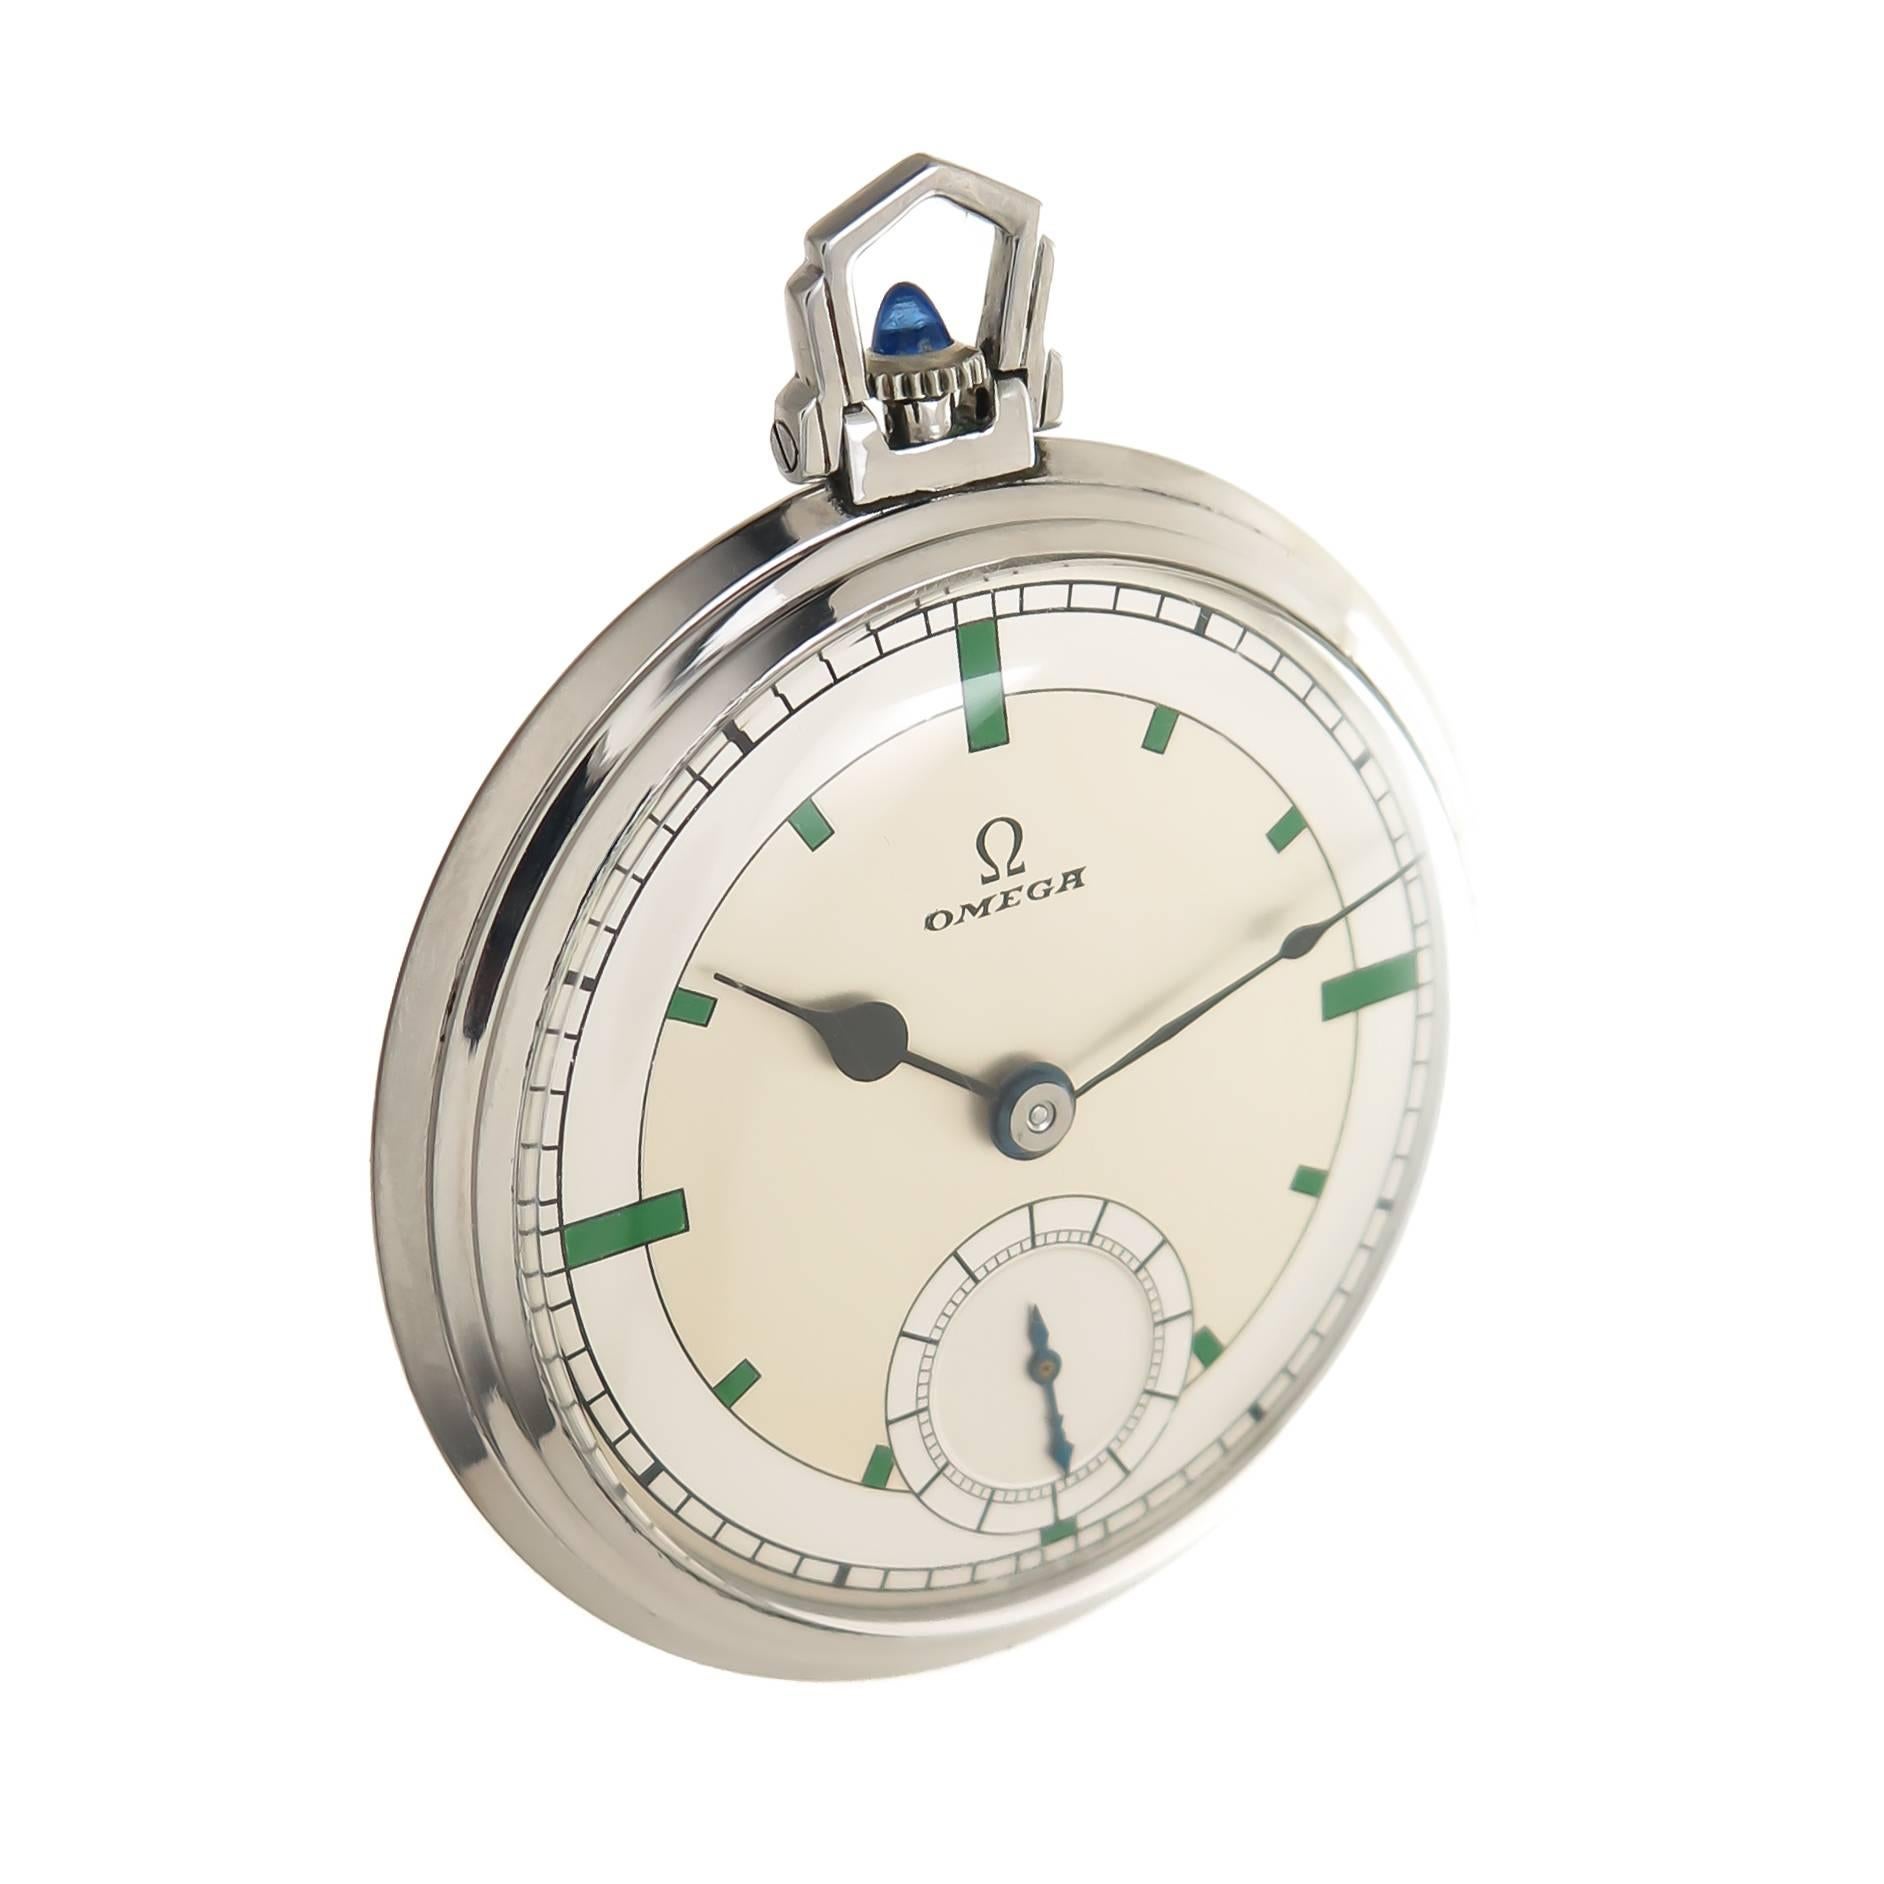 Circa 1930s Omega Pocket Watch, 39 MM Stainless Steel Signed Omega Stepped Case. 15 Jewel Manual Wind movement, Sapphire Crown. Two Tone Silver dial with Green Enamel Markers and a sub seconds chapter. Excellent condition. Recently serviced and